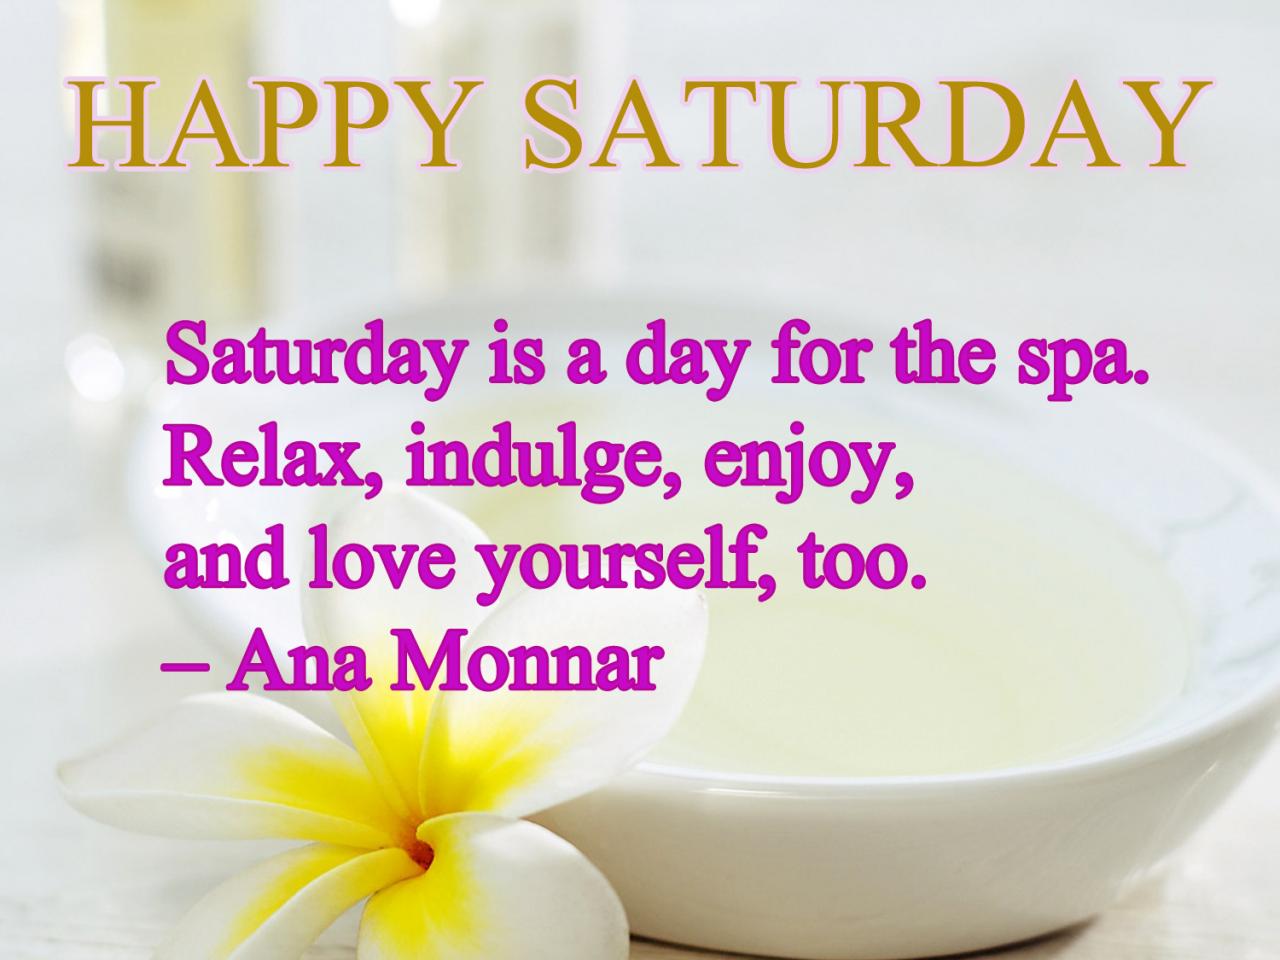 Best Saturday Thoughts and Short Quotes Wallpaper 05 is a day for the spa HD Wallpaper for Laptops and Smartphones